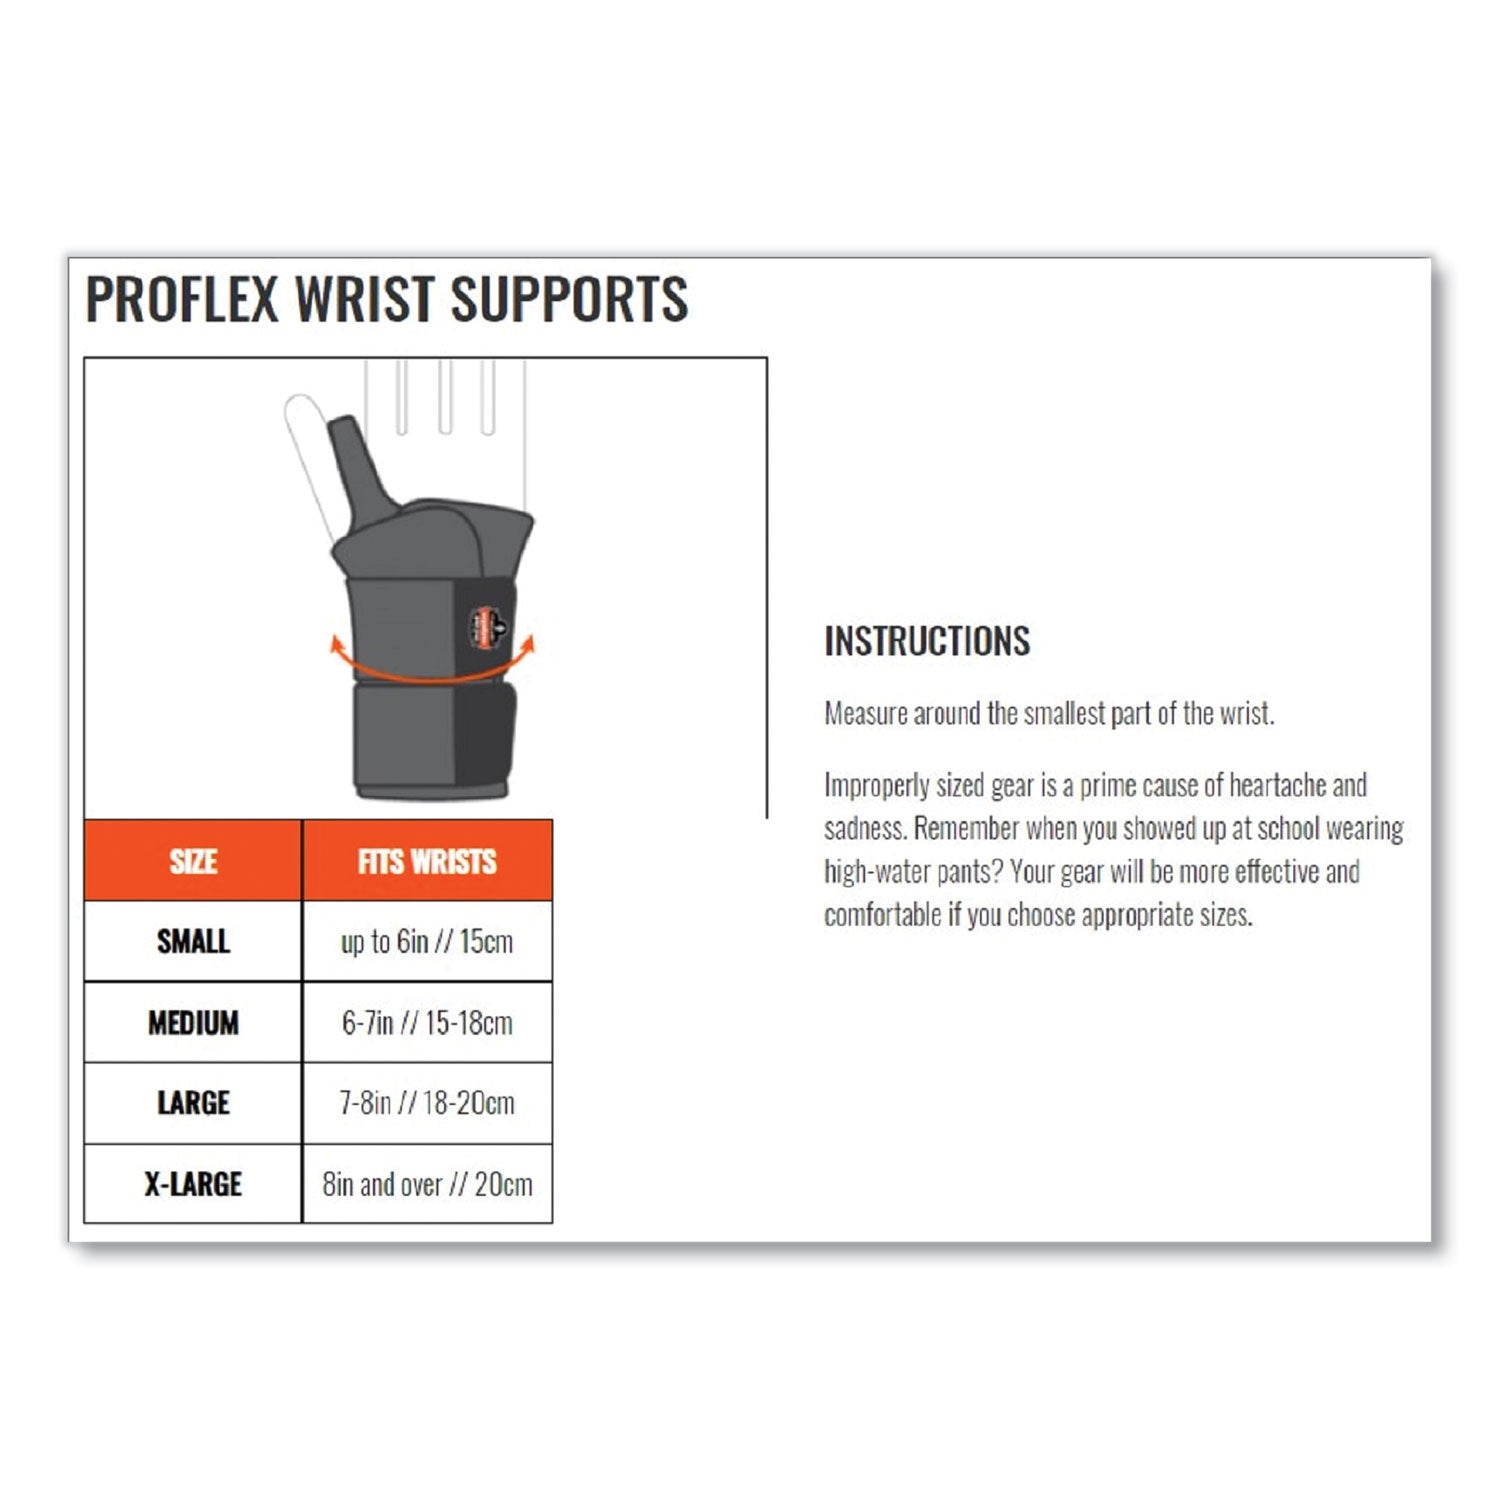 proflex-4000-single-strap-wrist-support-small-fits-right-hand-black-ships-in-1-3-business-days_ego70002 - 2